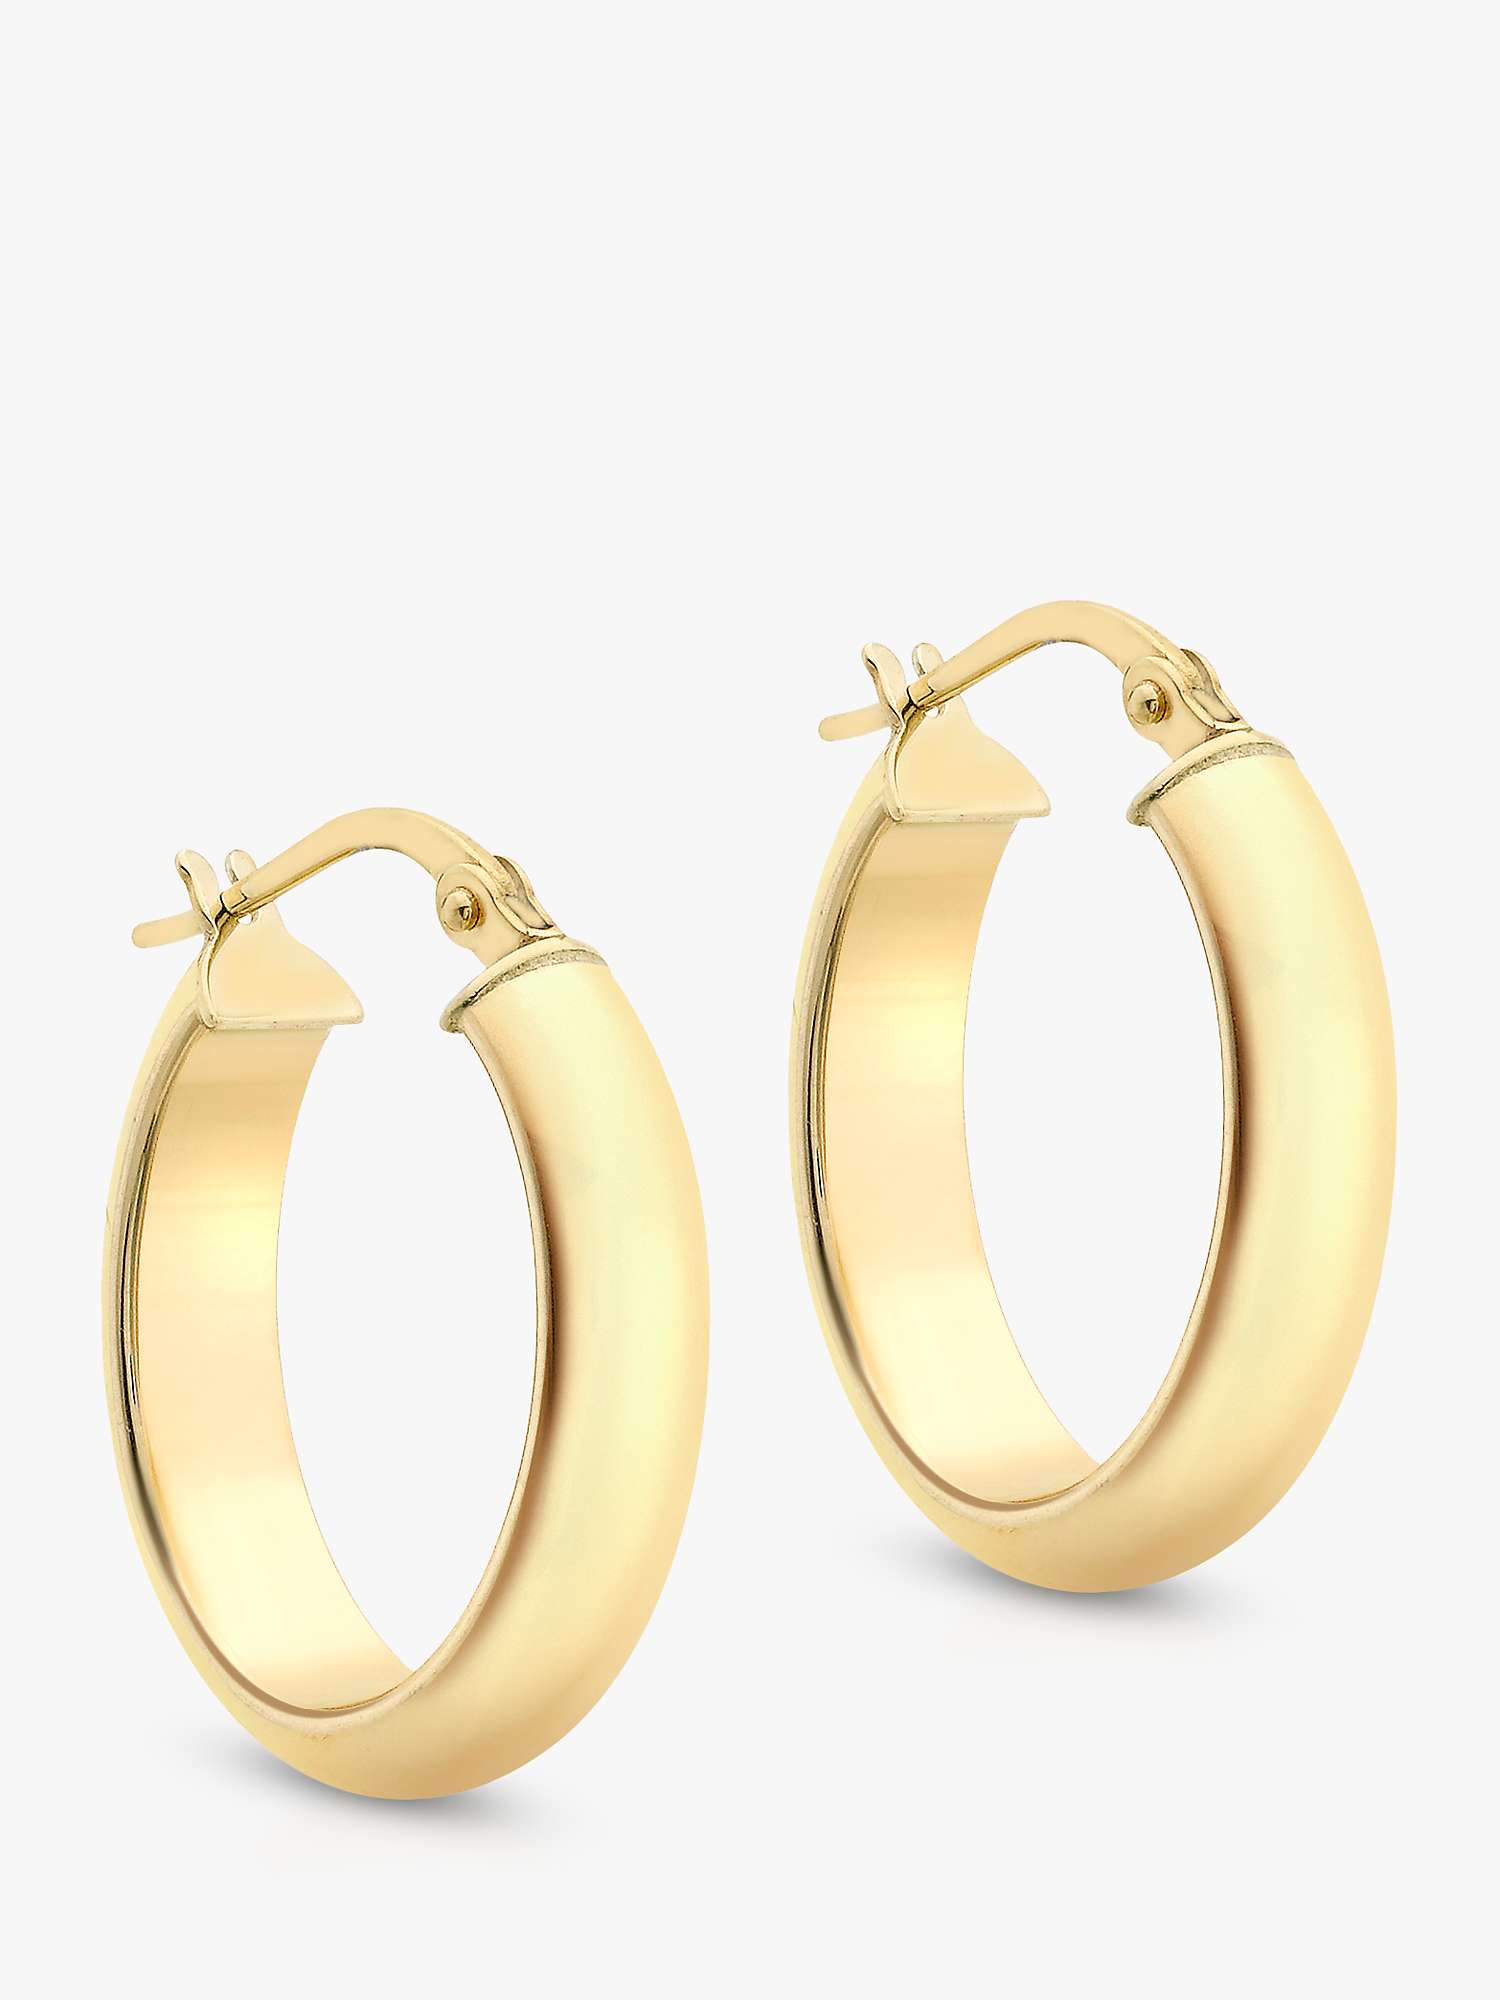 Buy IBB 9ct Yellow Gold Polished Oval Creole Earrings, Gold Online at johnlewis.com